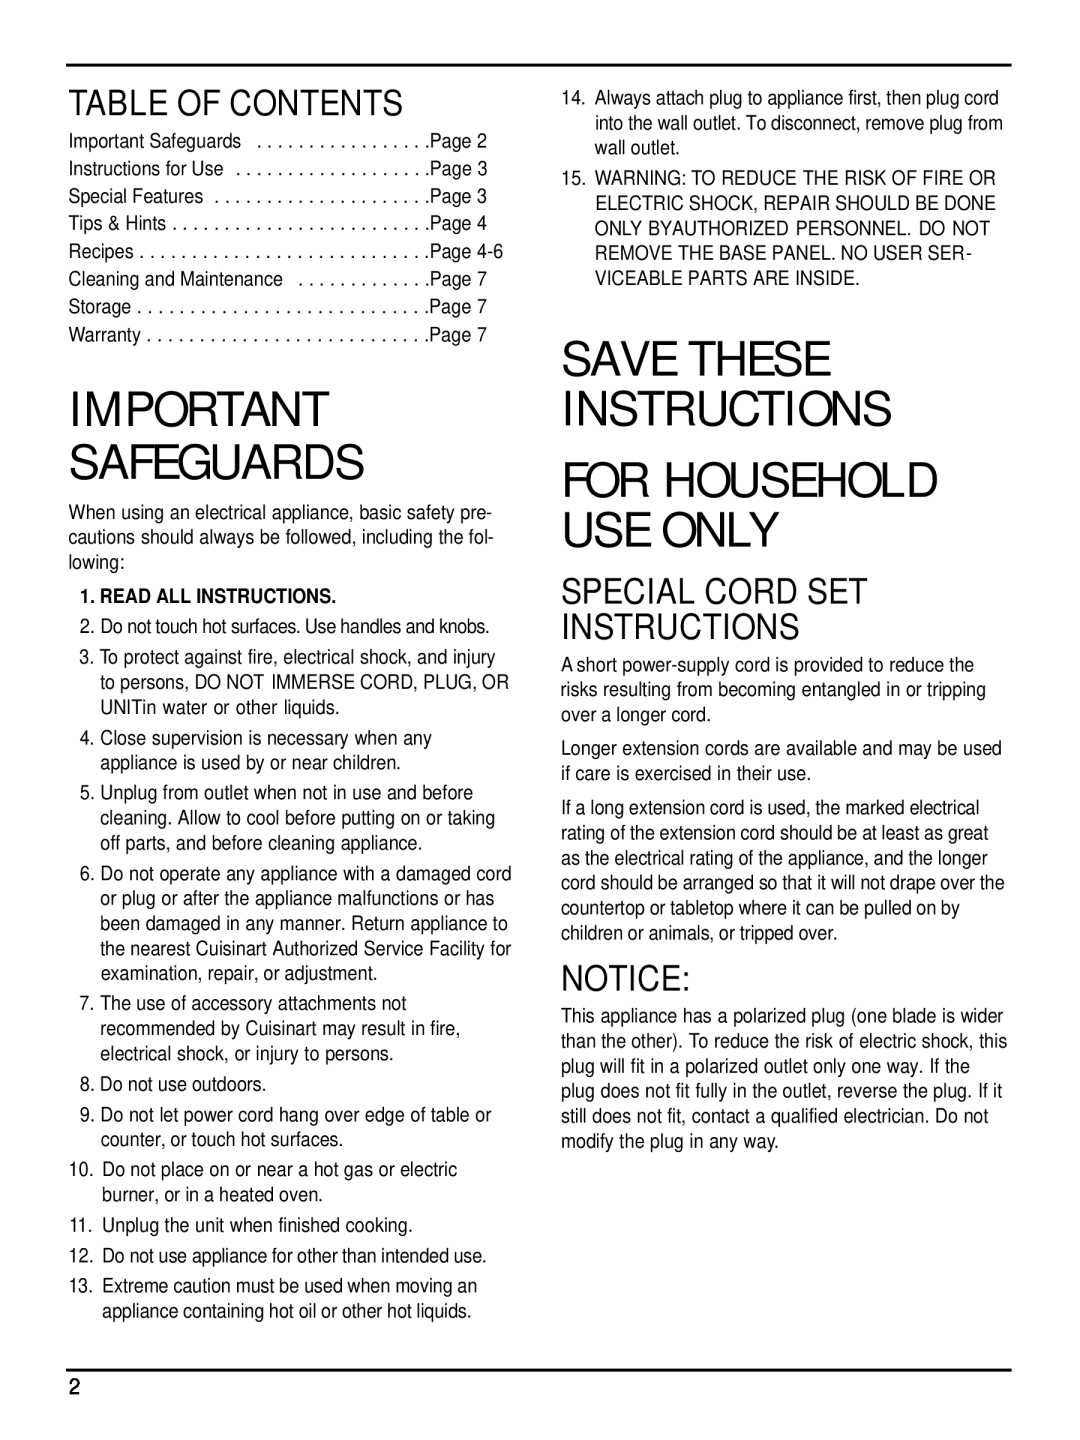 Cuisinart IB-4272, WM-SW2 manual Table Of Contents, Special Cord Set Instructions, Safeguards, Save These Instructions 